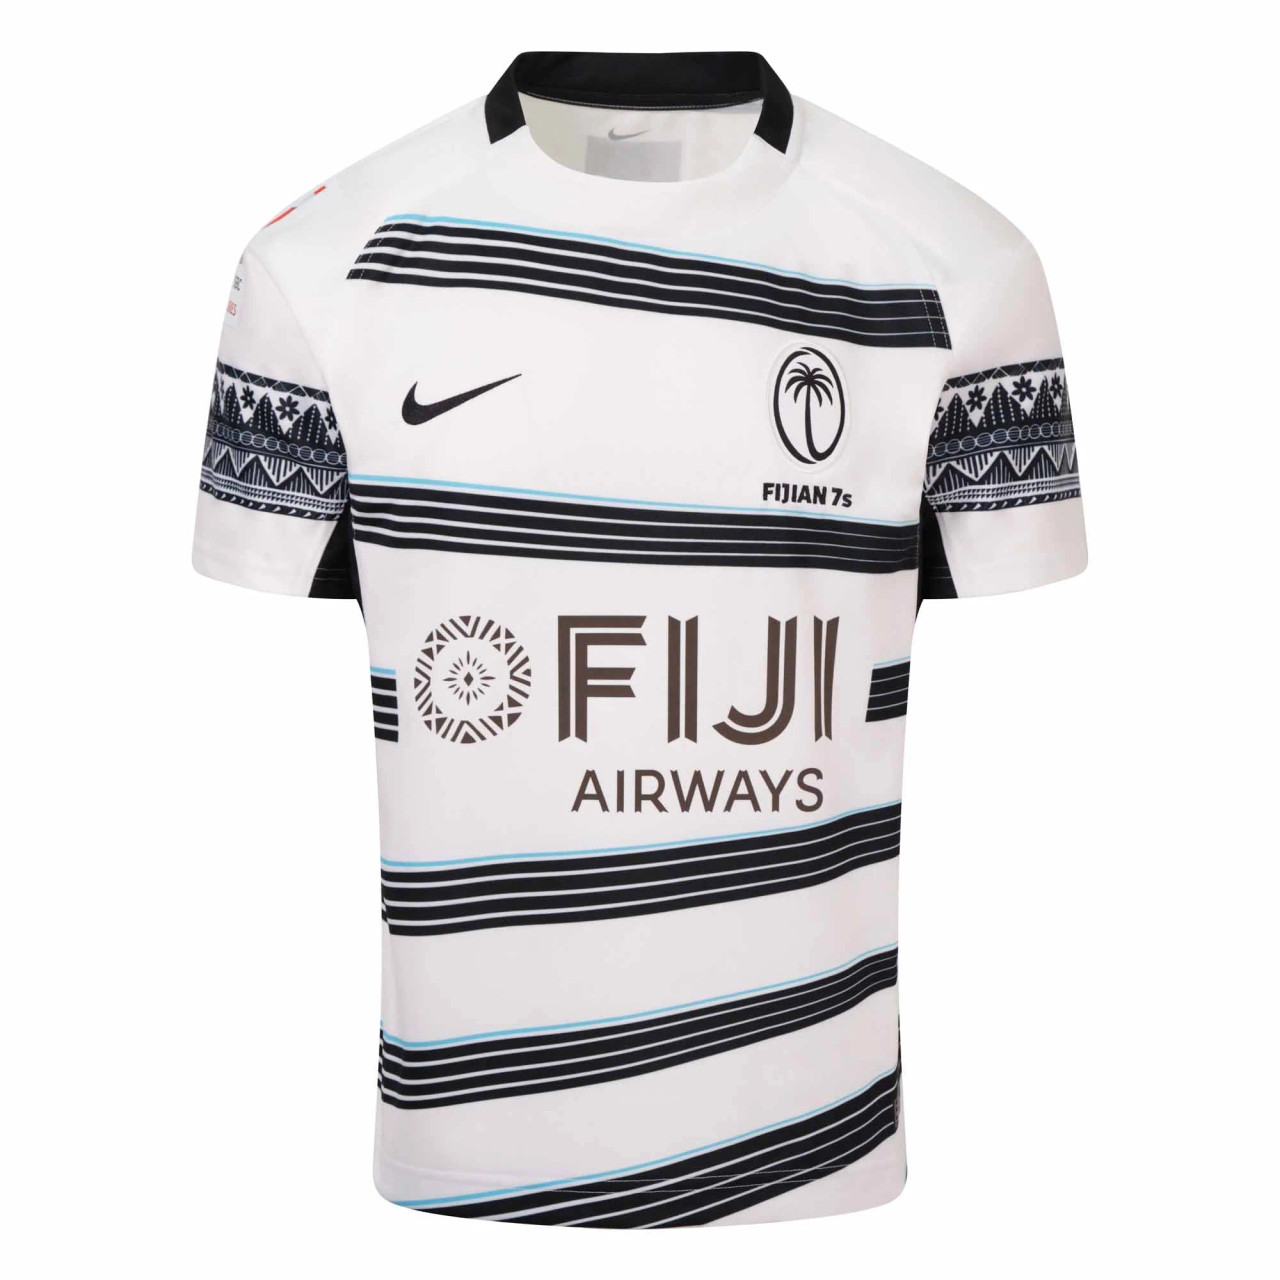 ISC Fiji Jersey - on sale at Rugby City 99.99